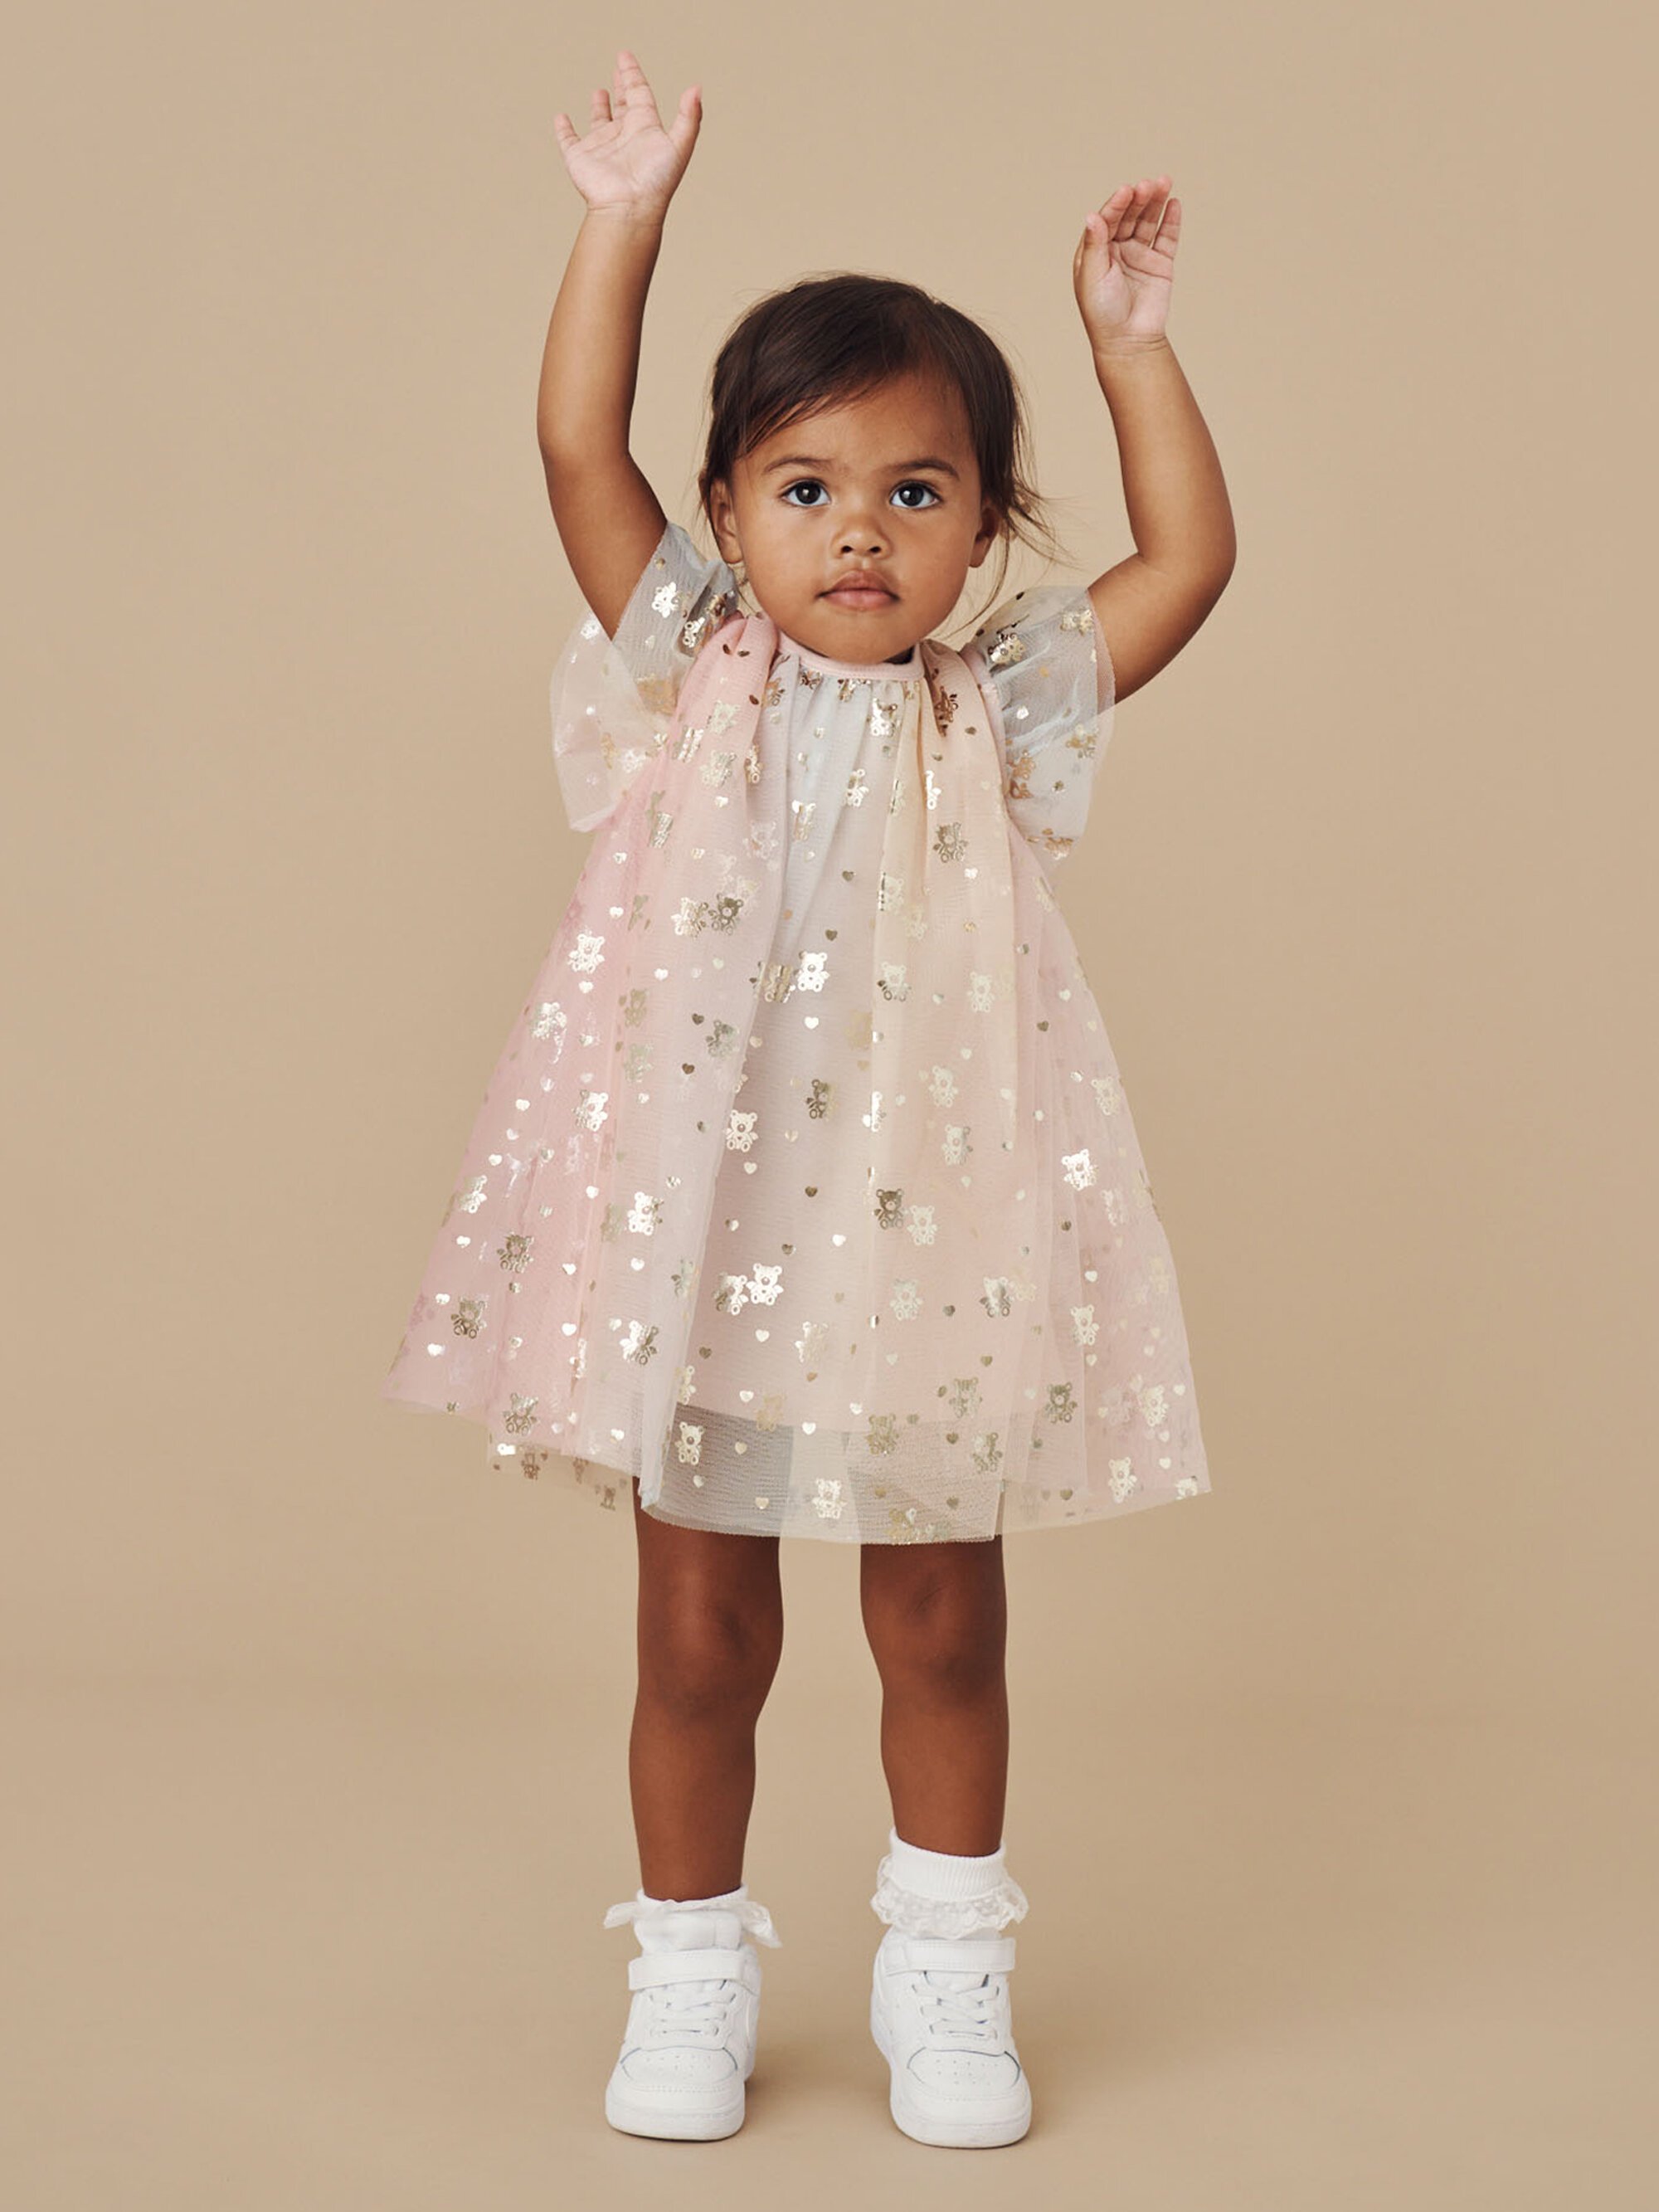 HOMELEX Kids Angel Costume With Halo Christmas Church Robes Angel Dress for  Girl : Clothing, Shoes & Jewelry - Amazon.com